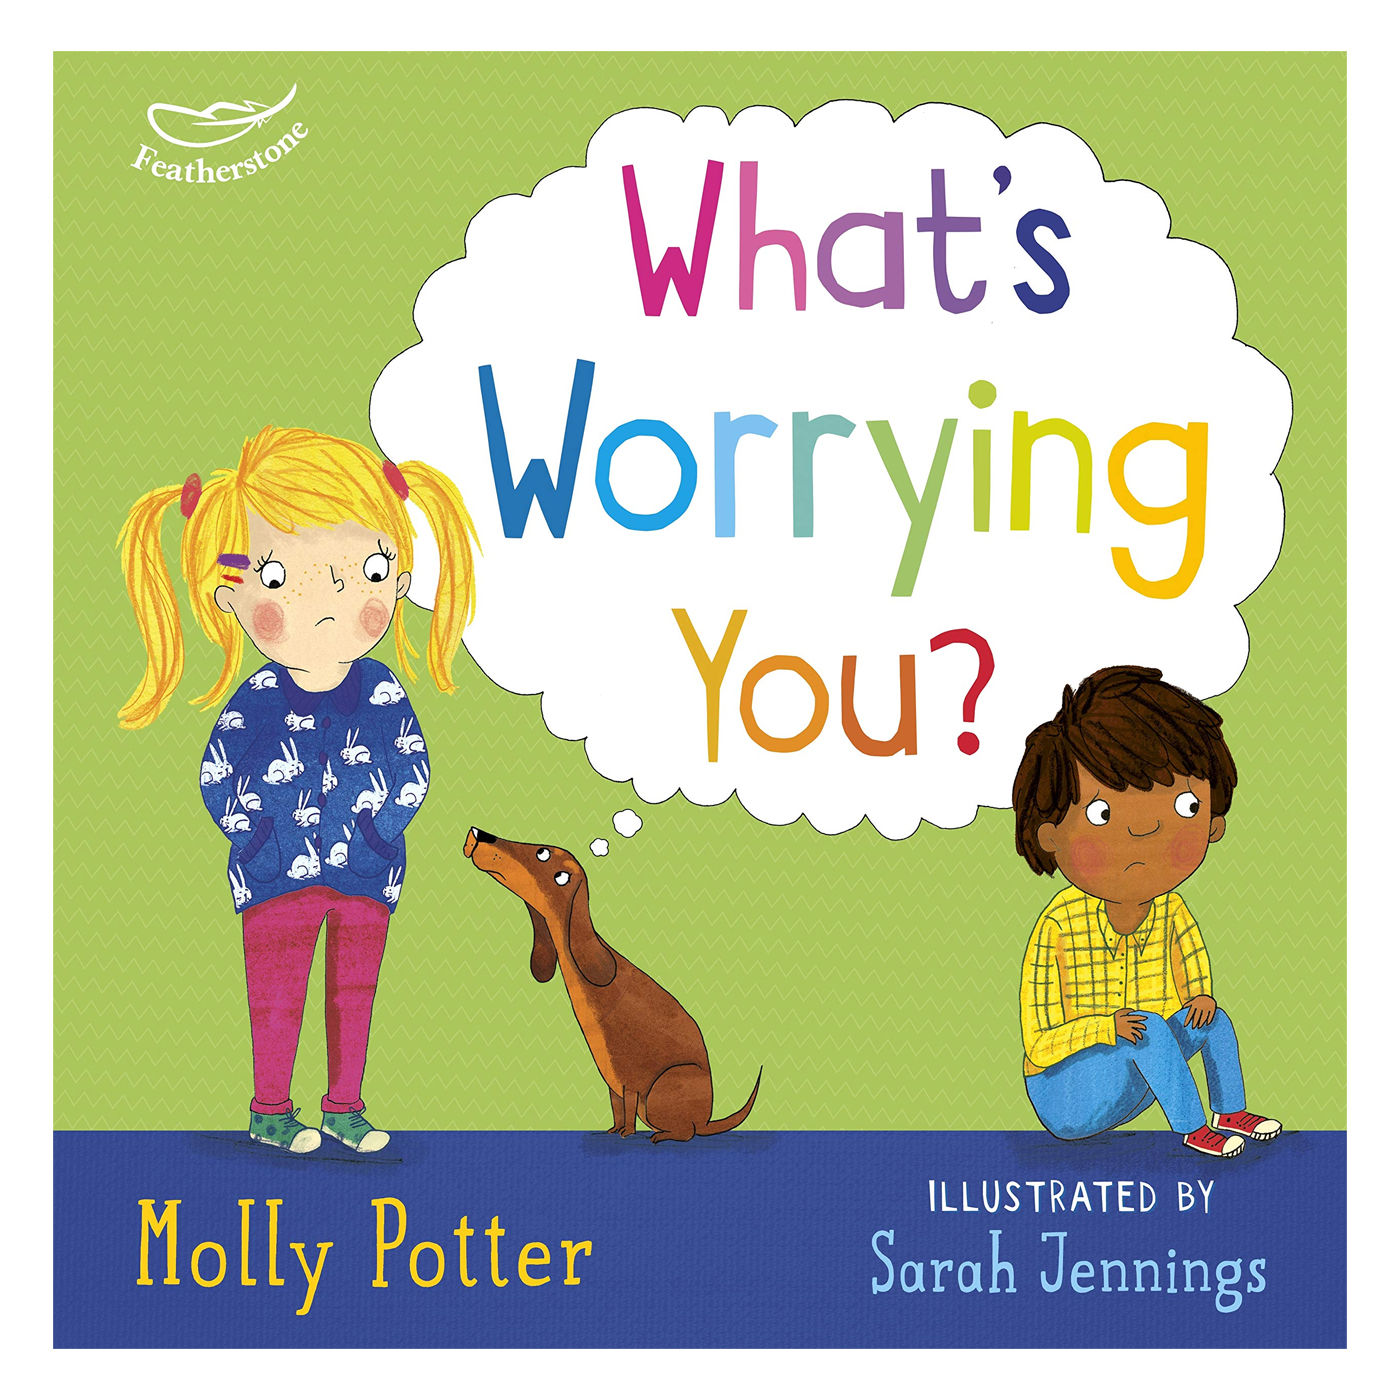  What's Worrying you?